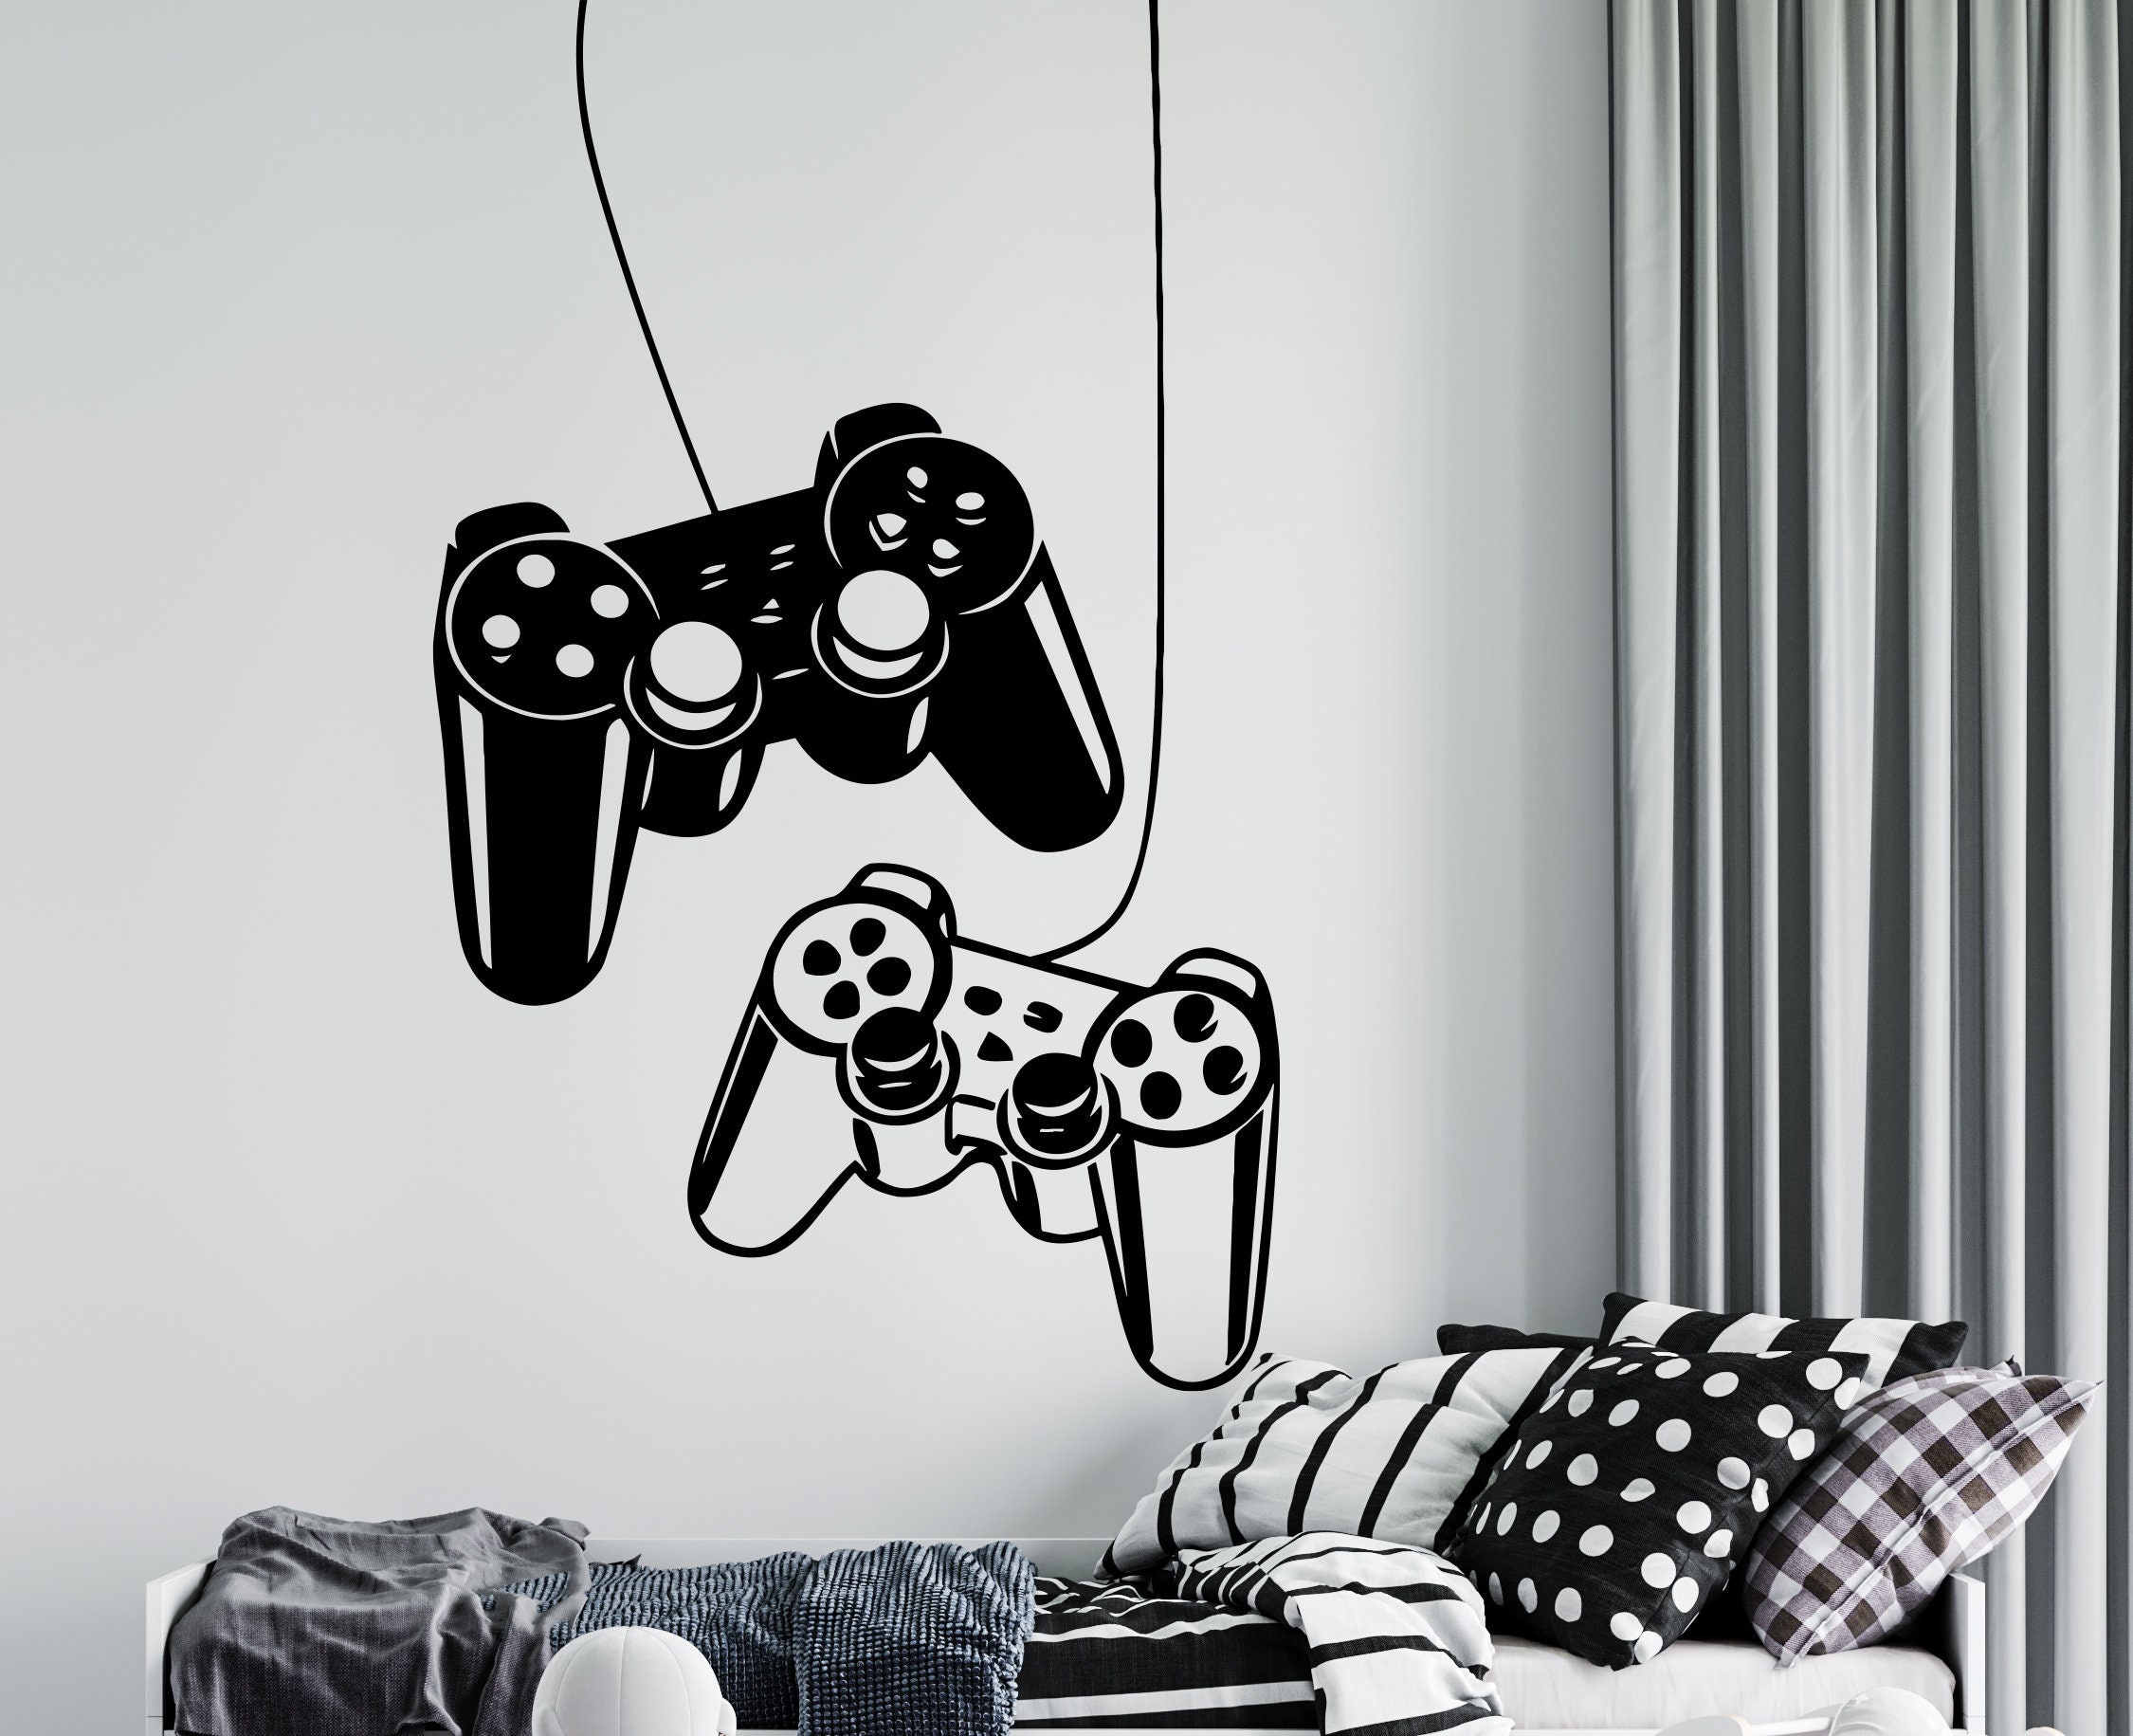 Gamer Wall Decal Gamer Room Ps3 Ps4 Quote Wall Art Stickers Door